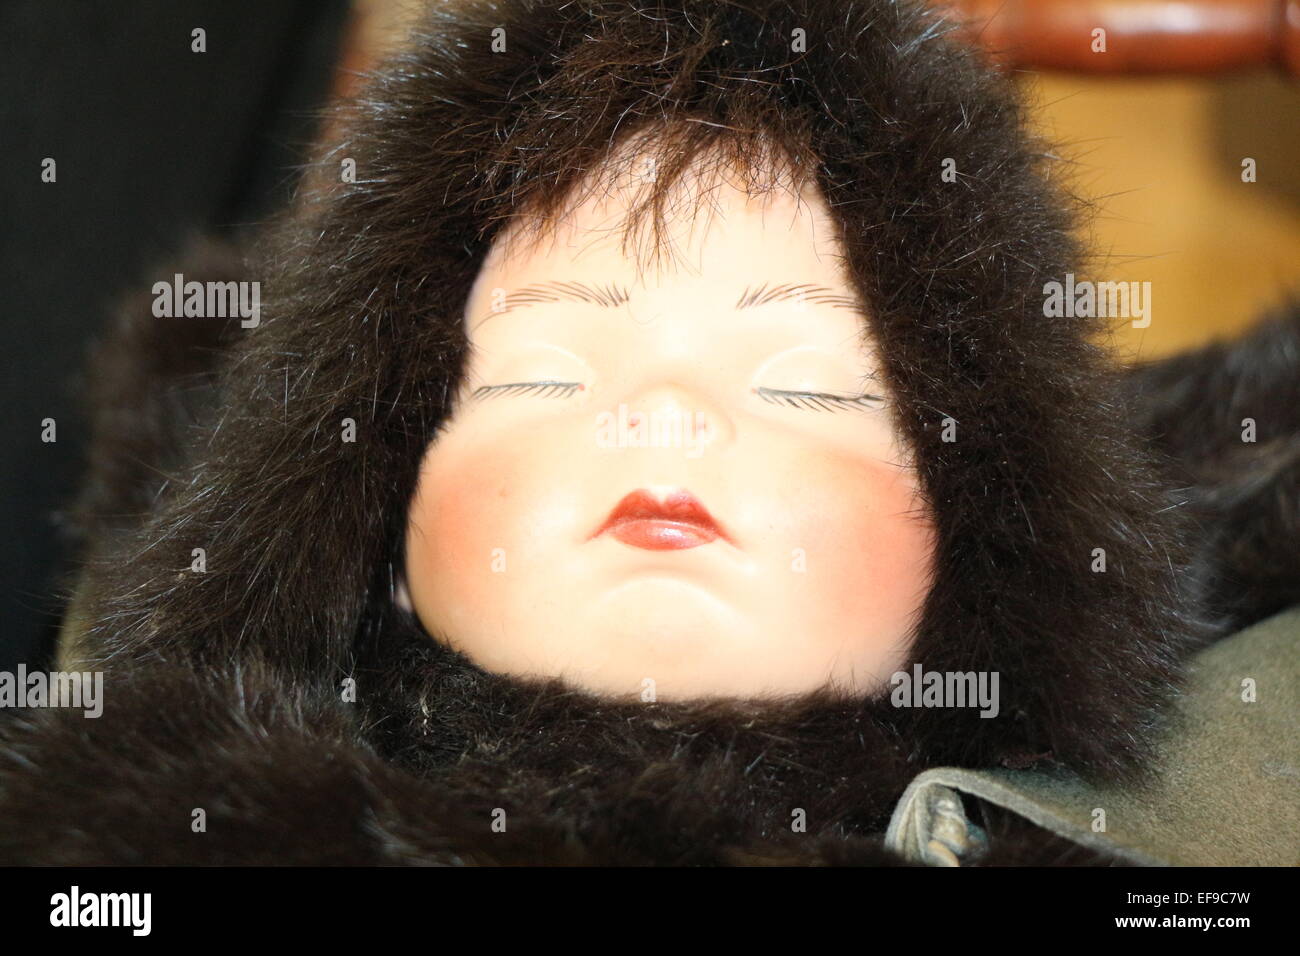 a native baby doll dress in fur, pretty face , baby face , hand made doll Stock Photo